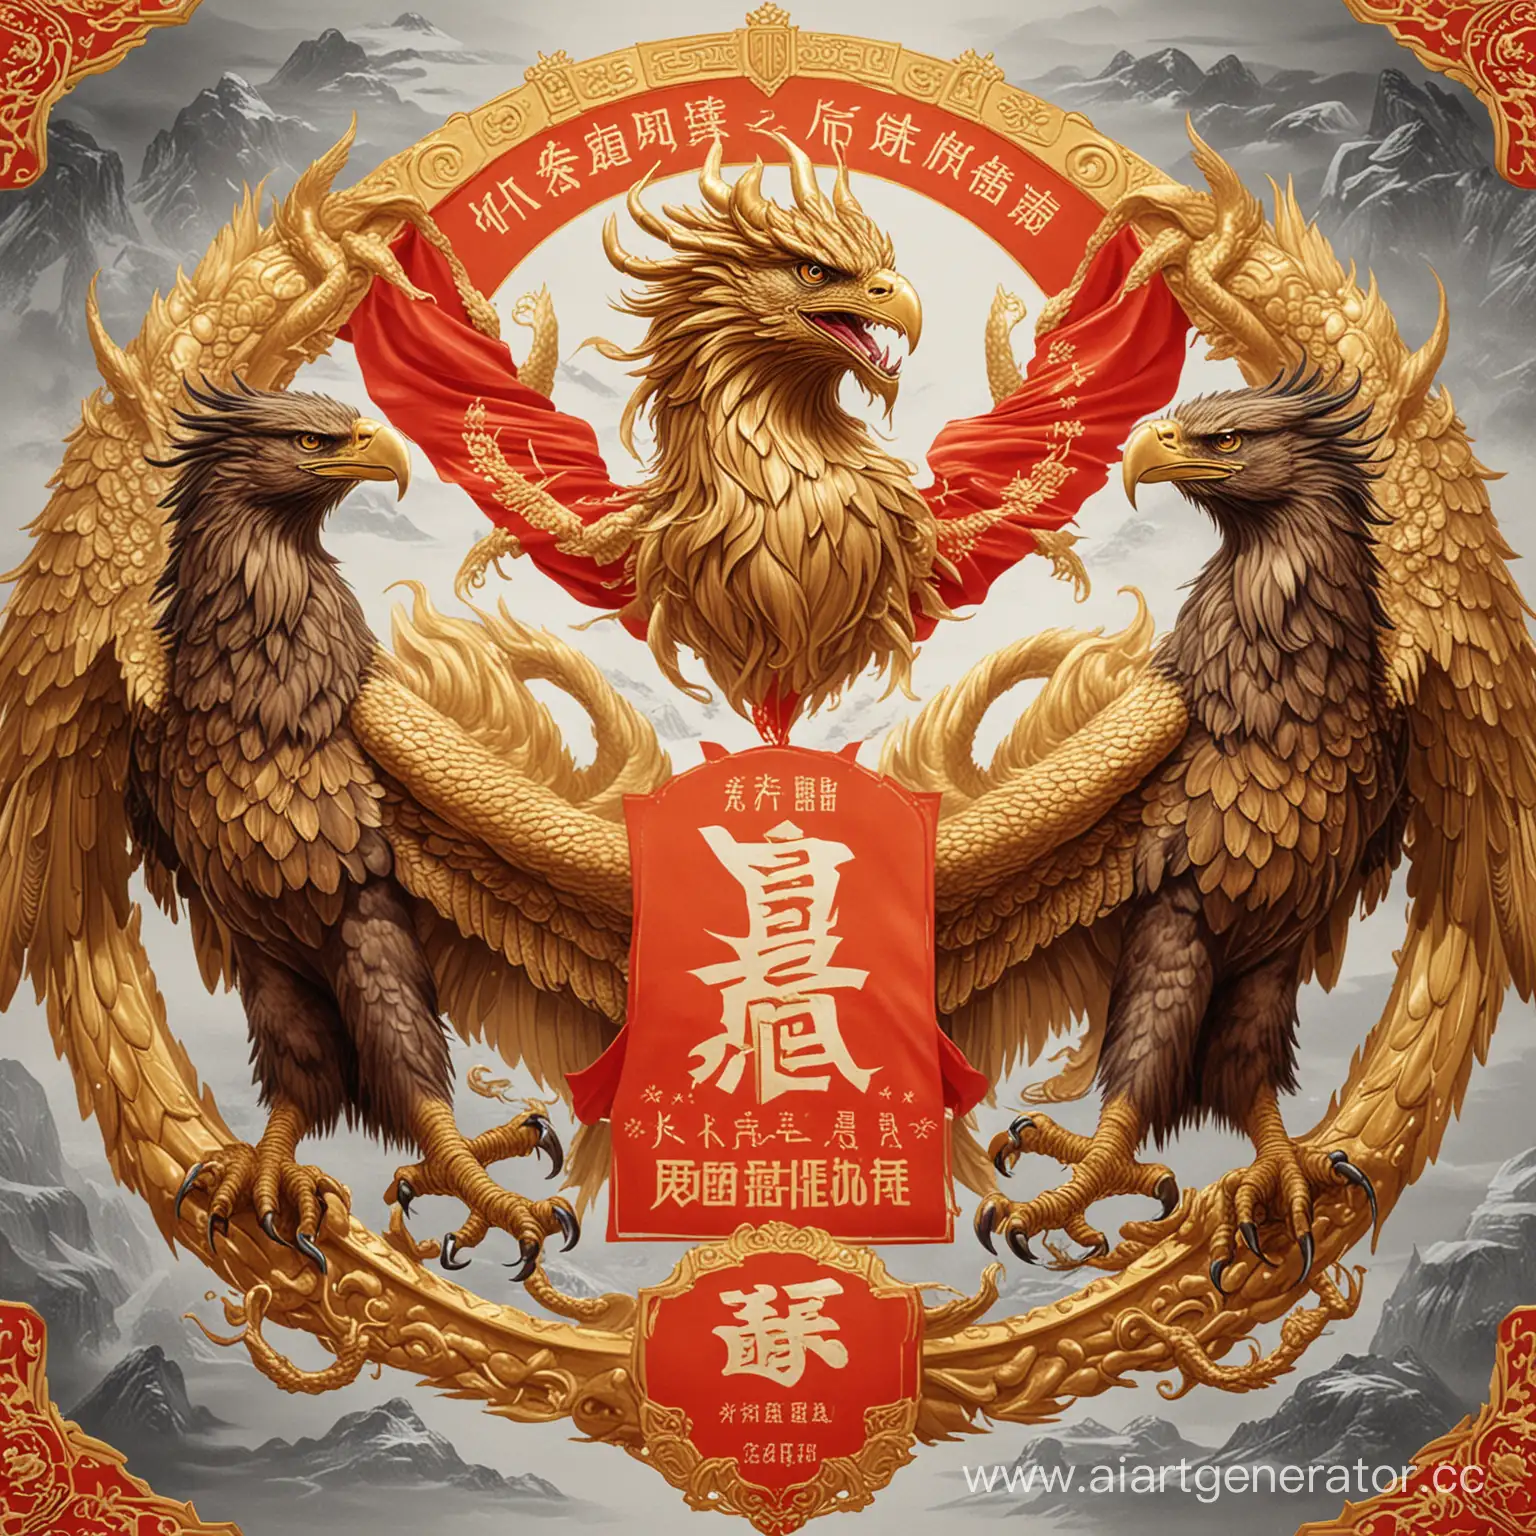 Golden-Dragon-and-Eagle-at-RussiaChina-Business-Forum